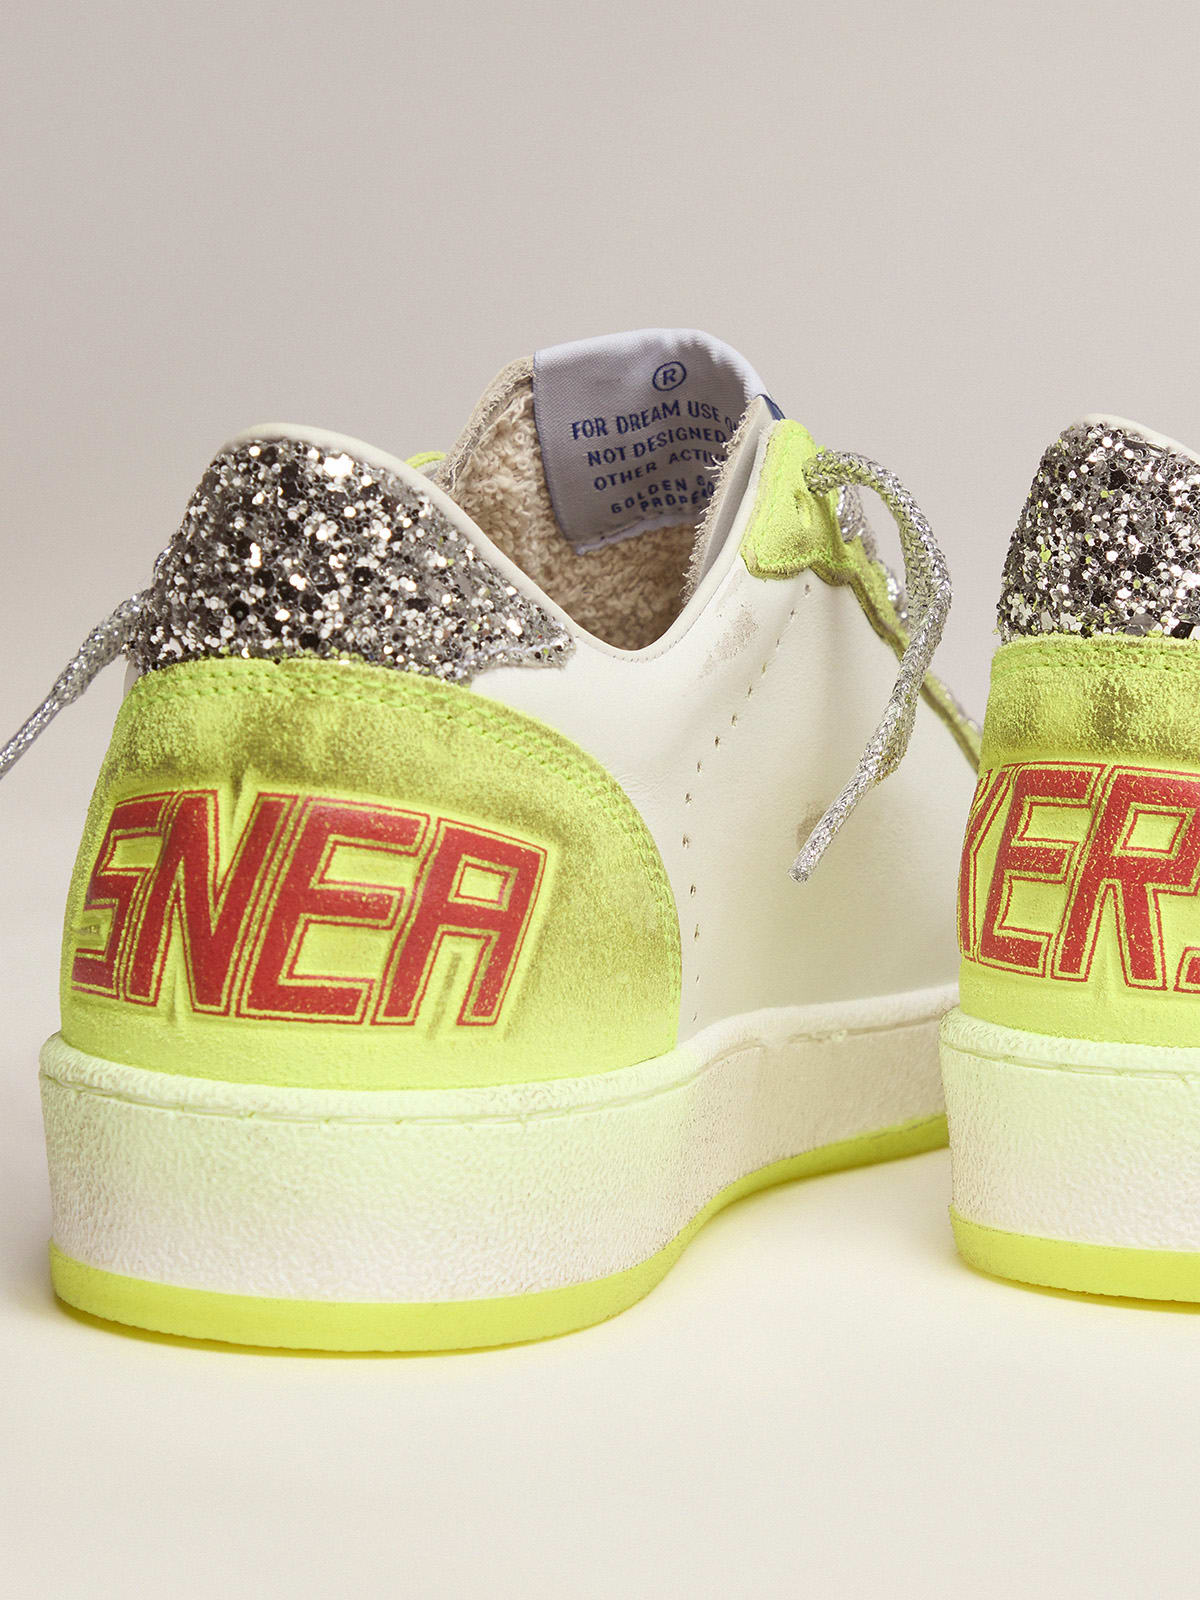 White Ball Star sneakers with fluorescent yellow inserts and glitter |  Golden Goose